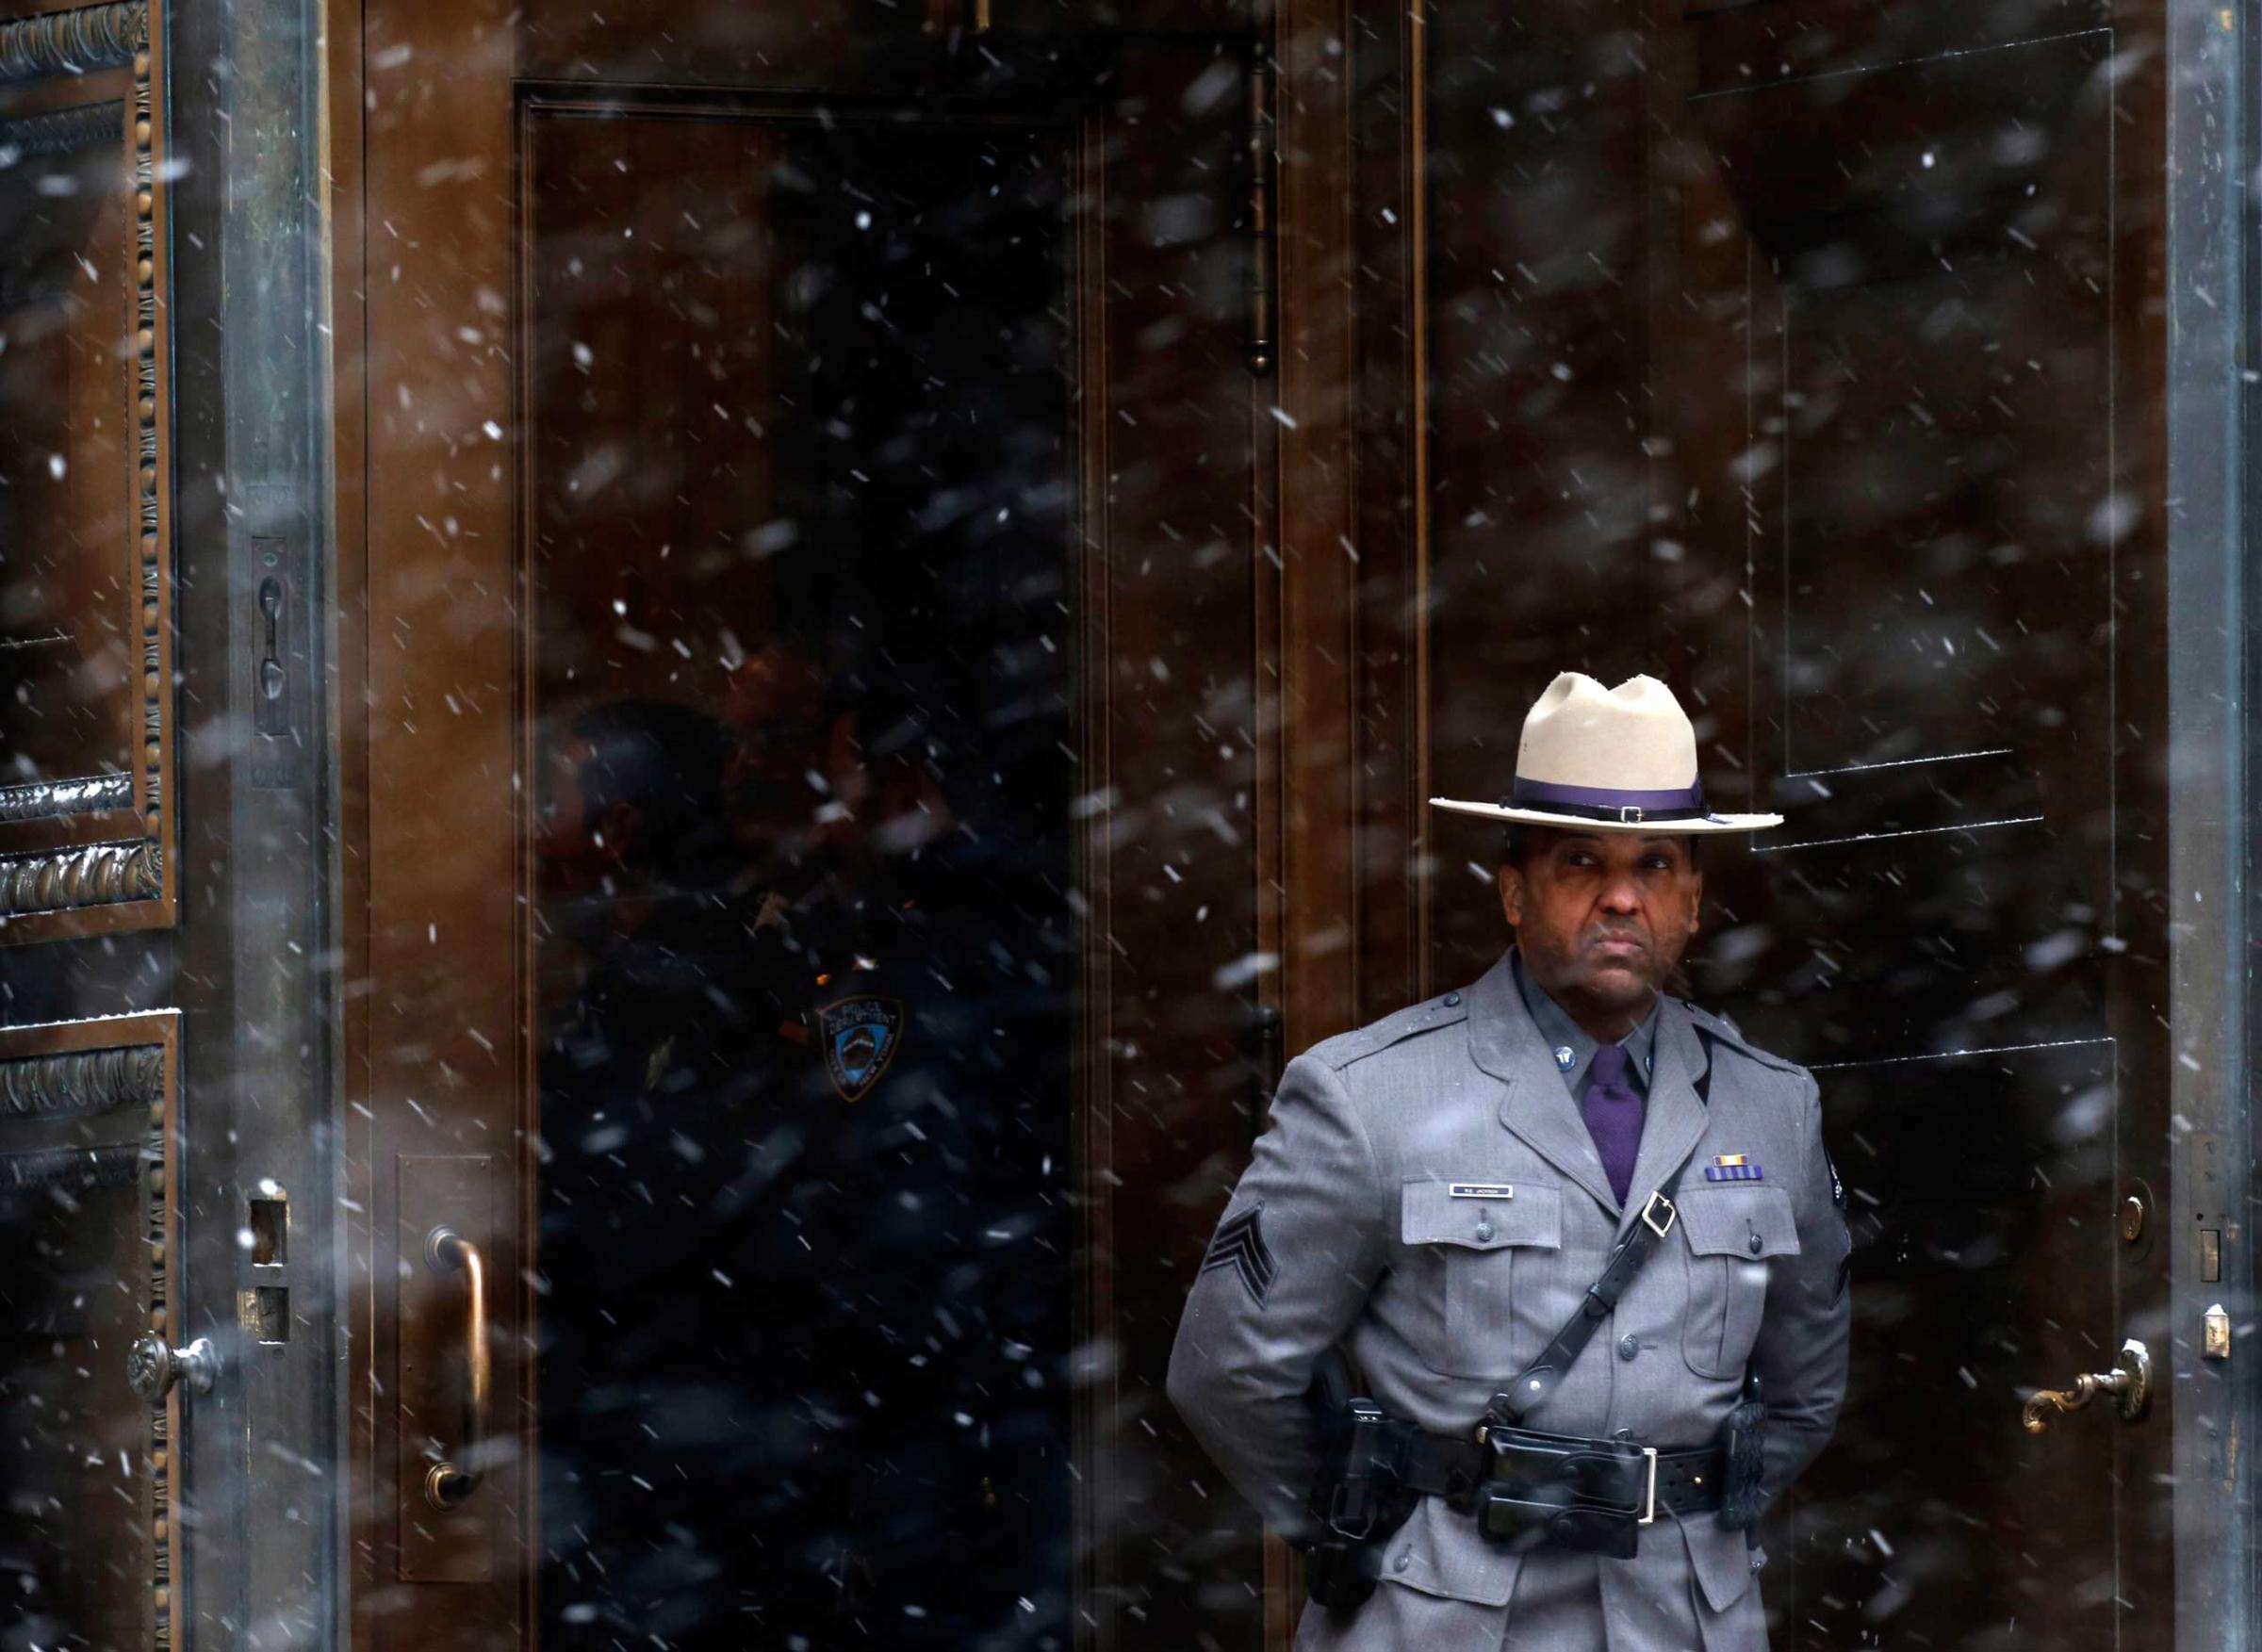 A New York State Police Trooper stands in the doorway outside St. Ignatius Loyola Church during the funeral service for former New York Governor Mario Cuomo in New York